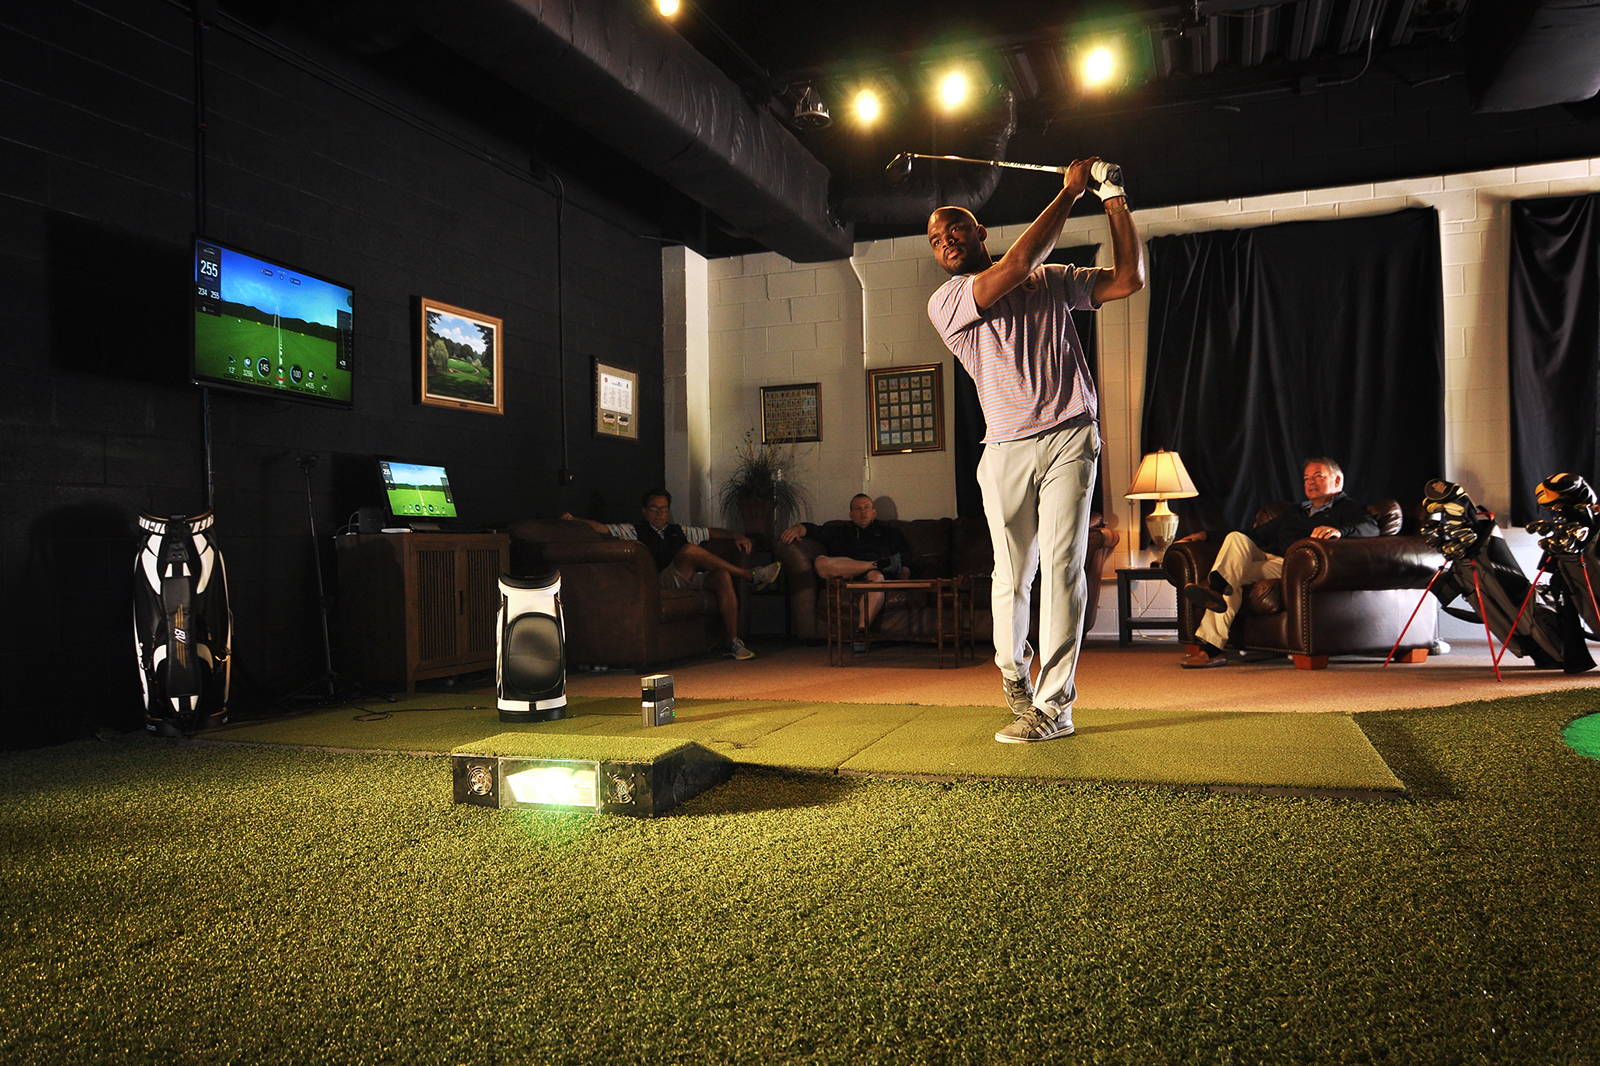 Golfer swinging in a golf simulator with the SkyTrack golf launch monitor